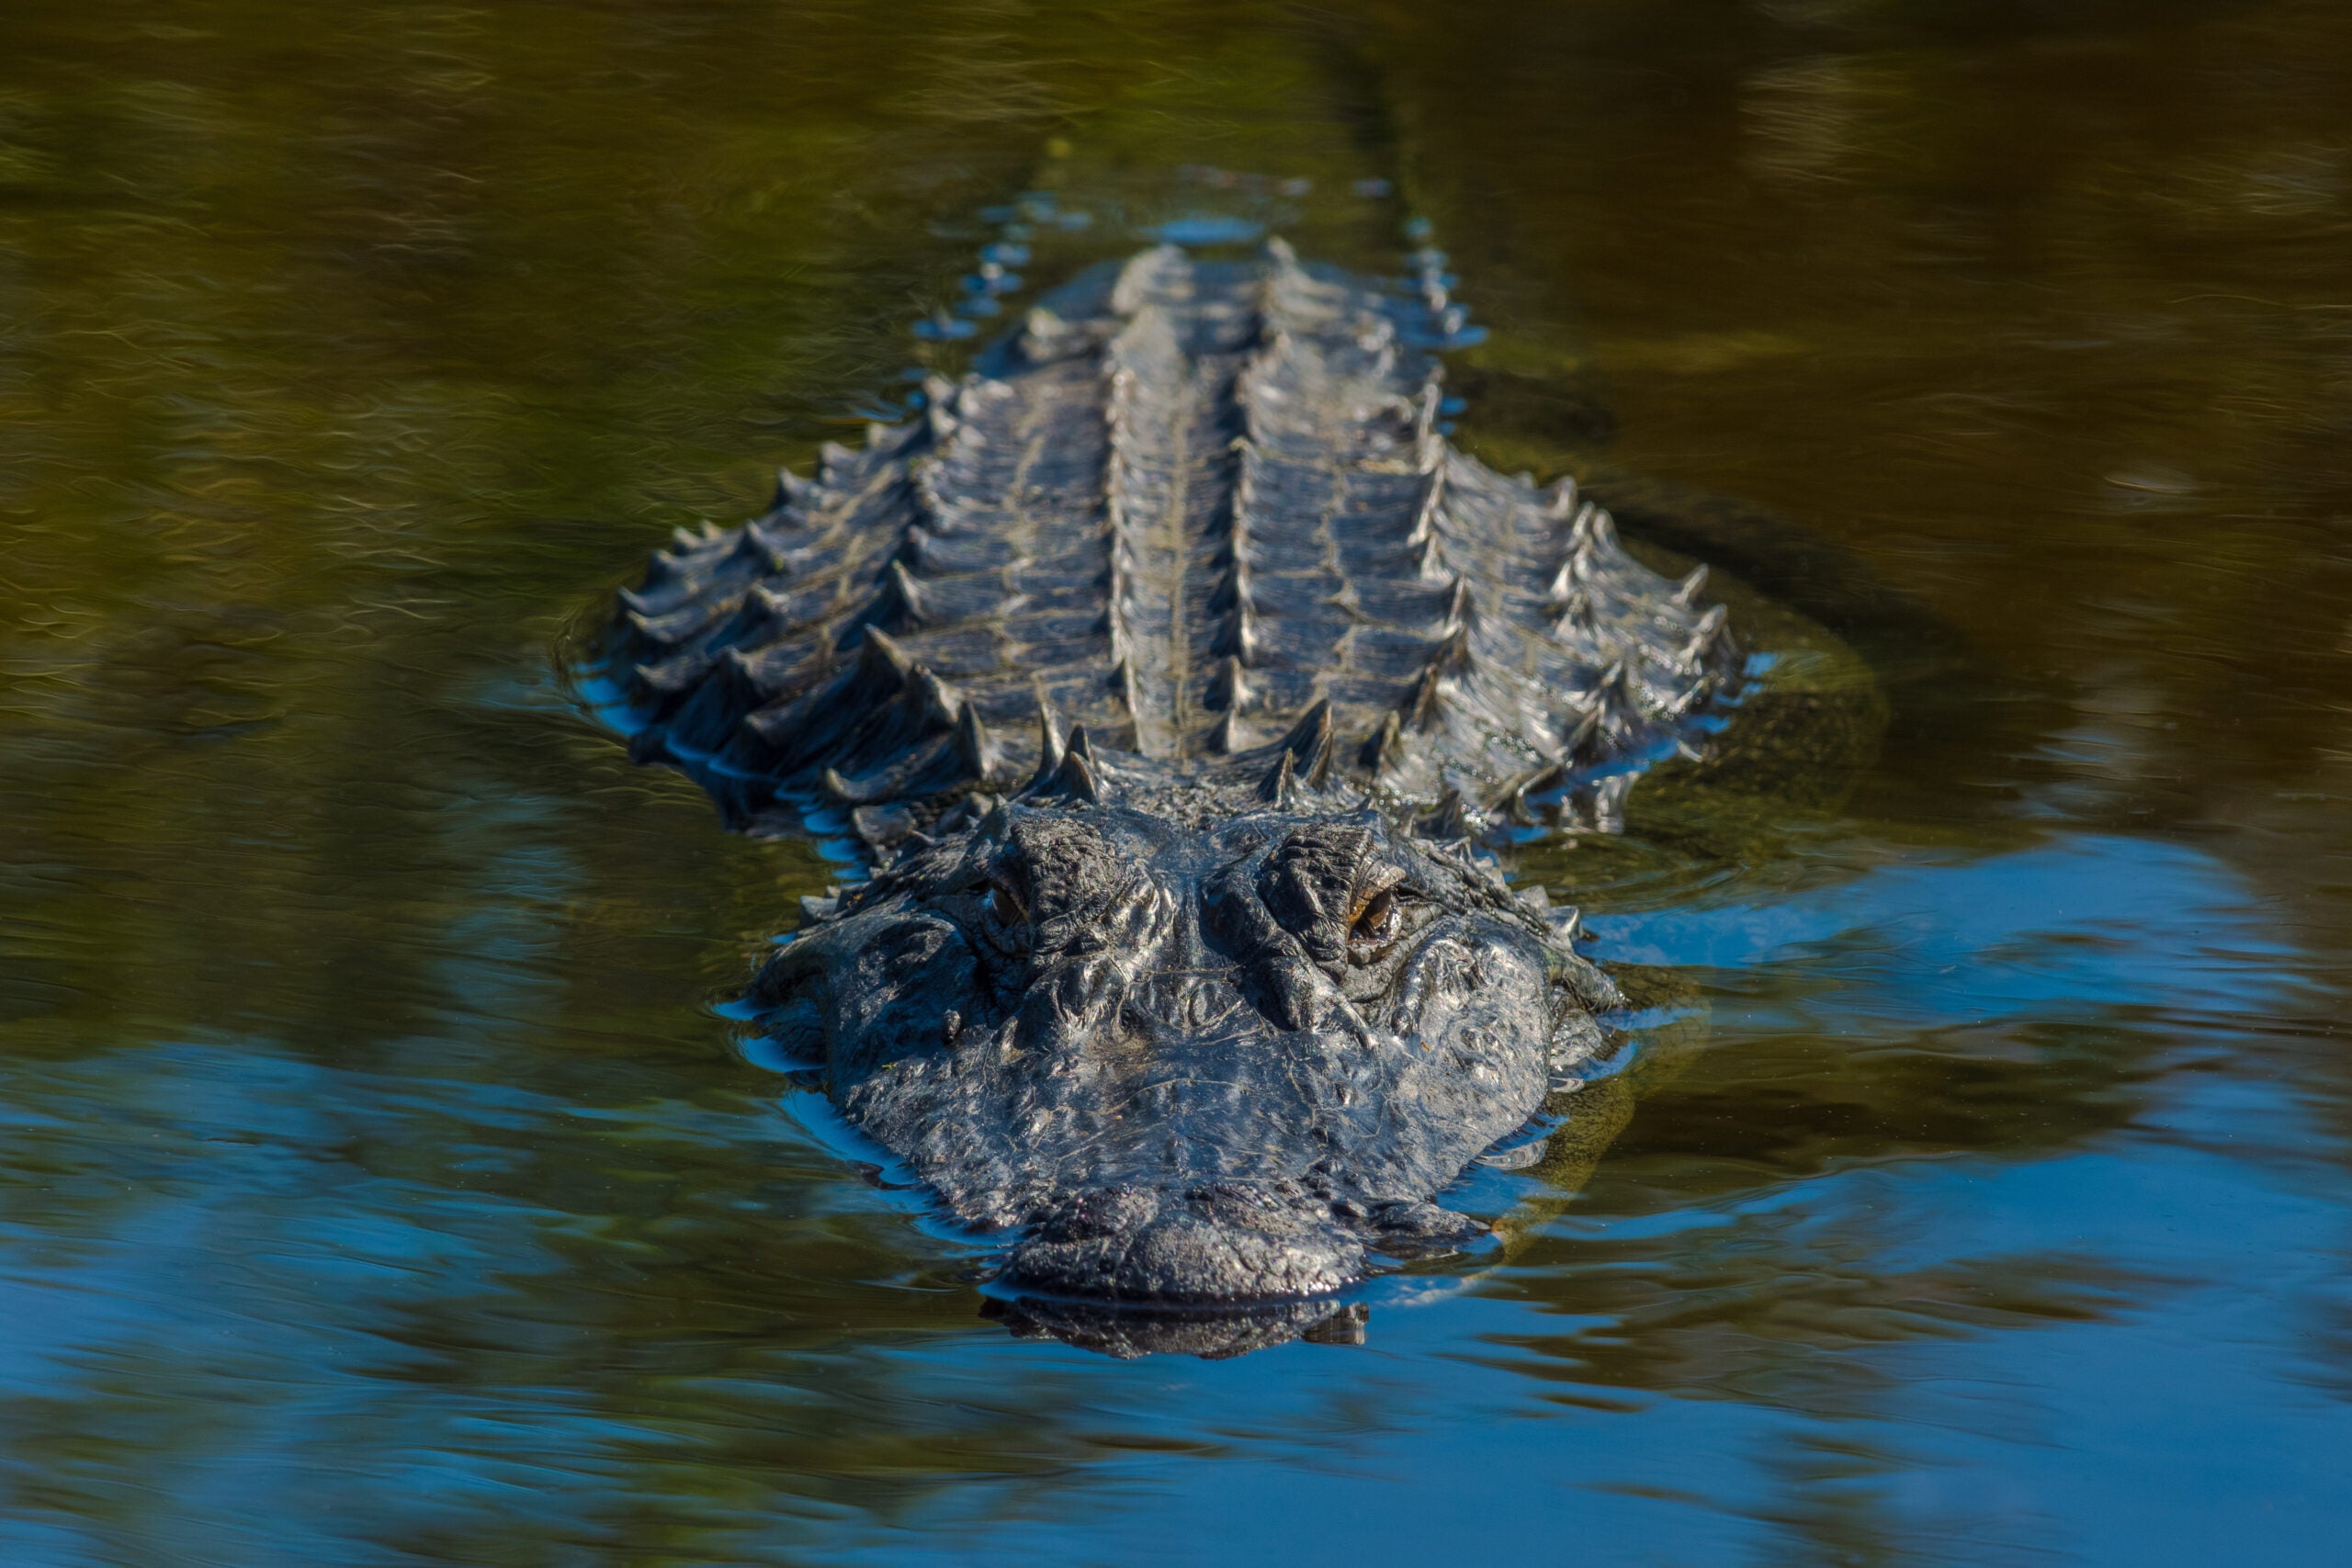 An alligator swims in the water with its head and back exposed from the water.